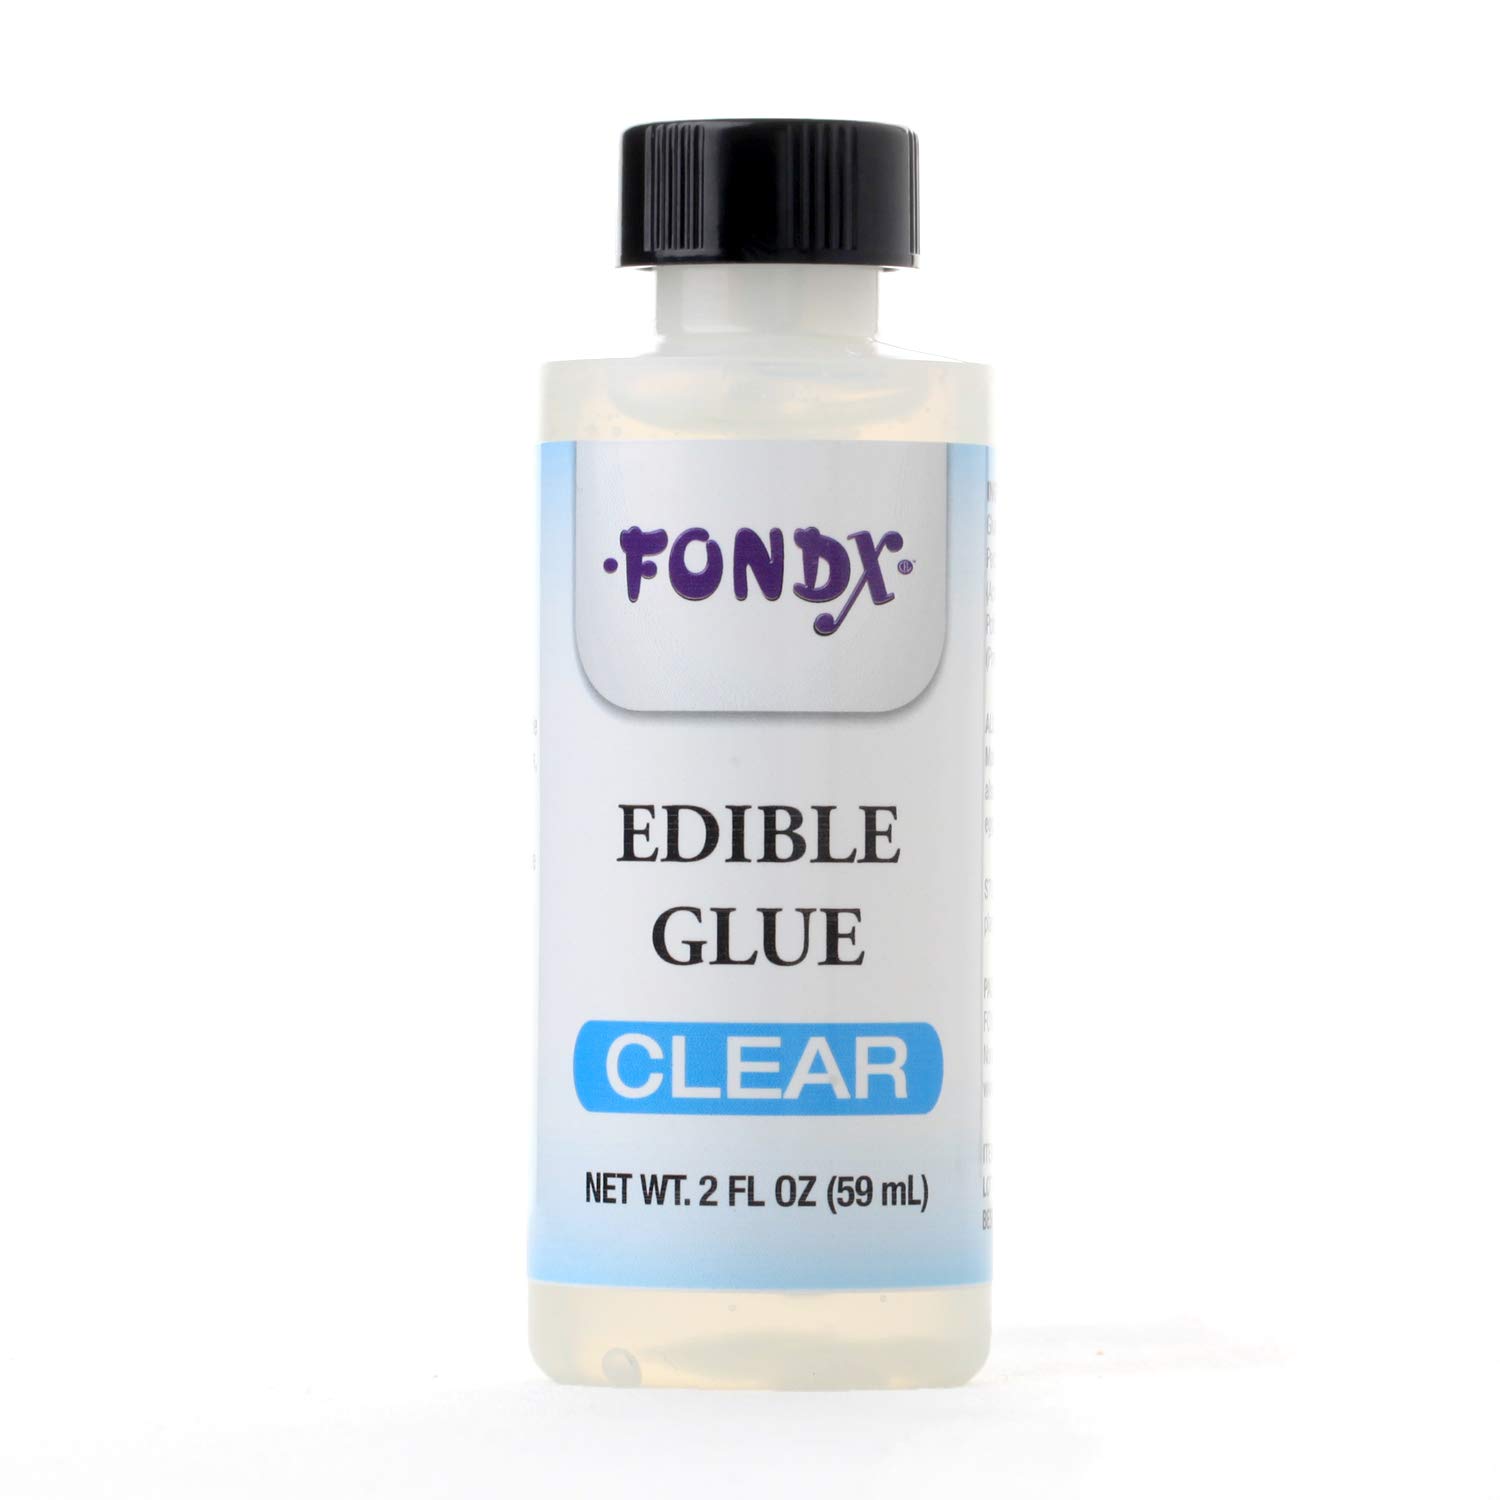 Edible glue: What is it and What is it For?